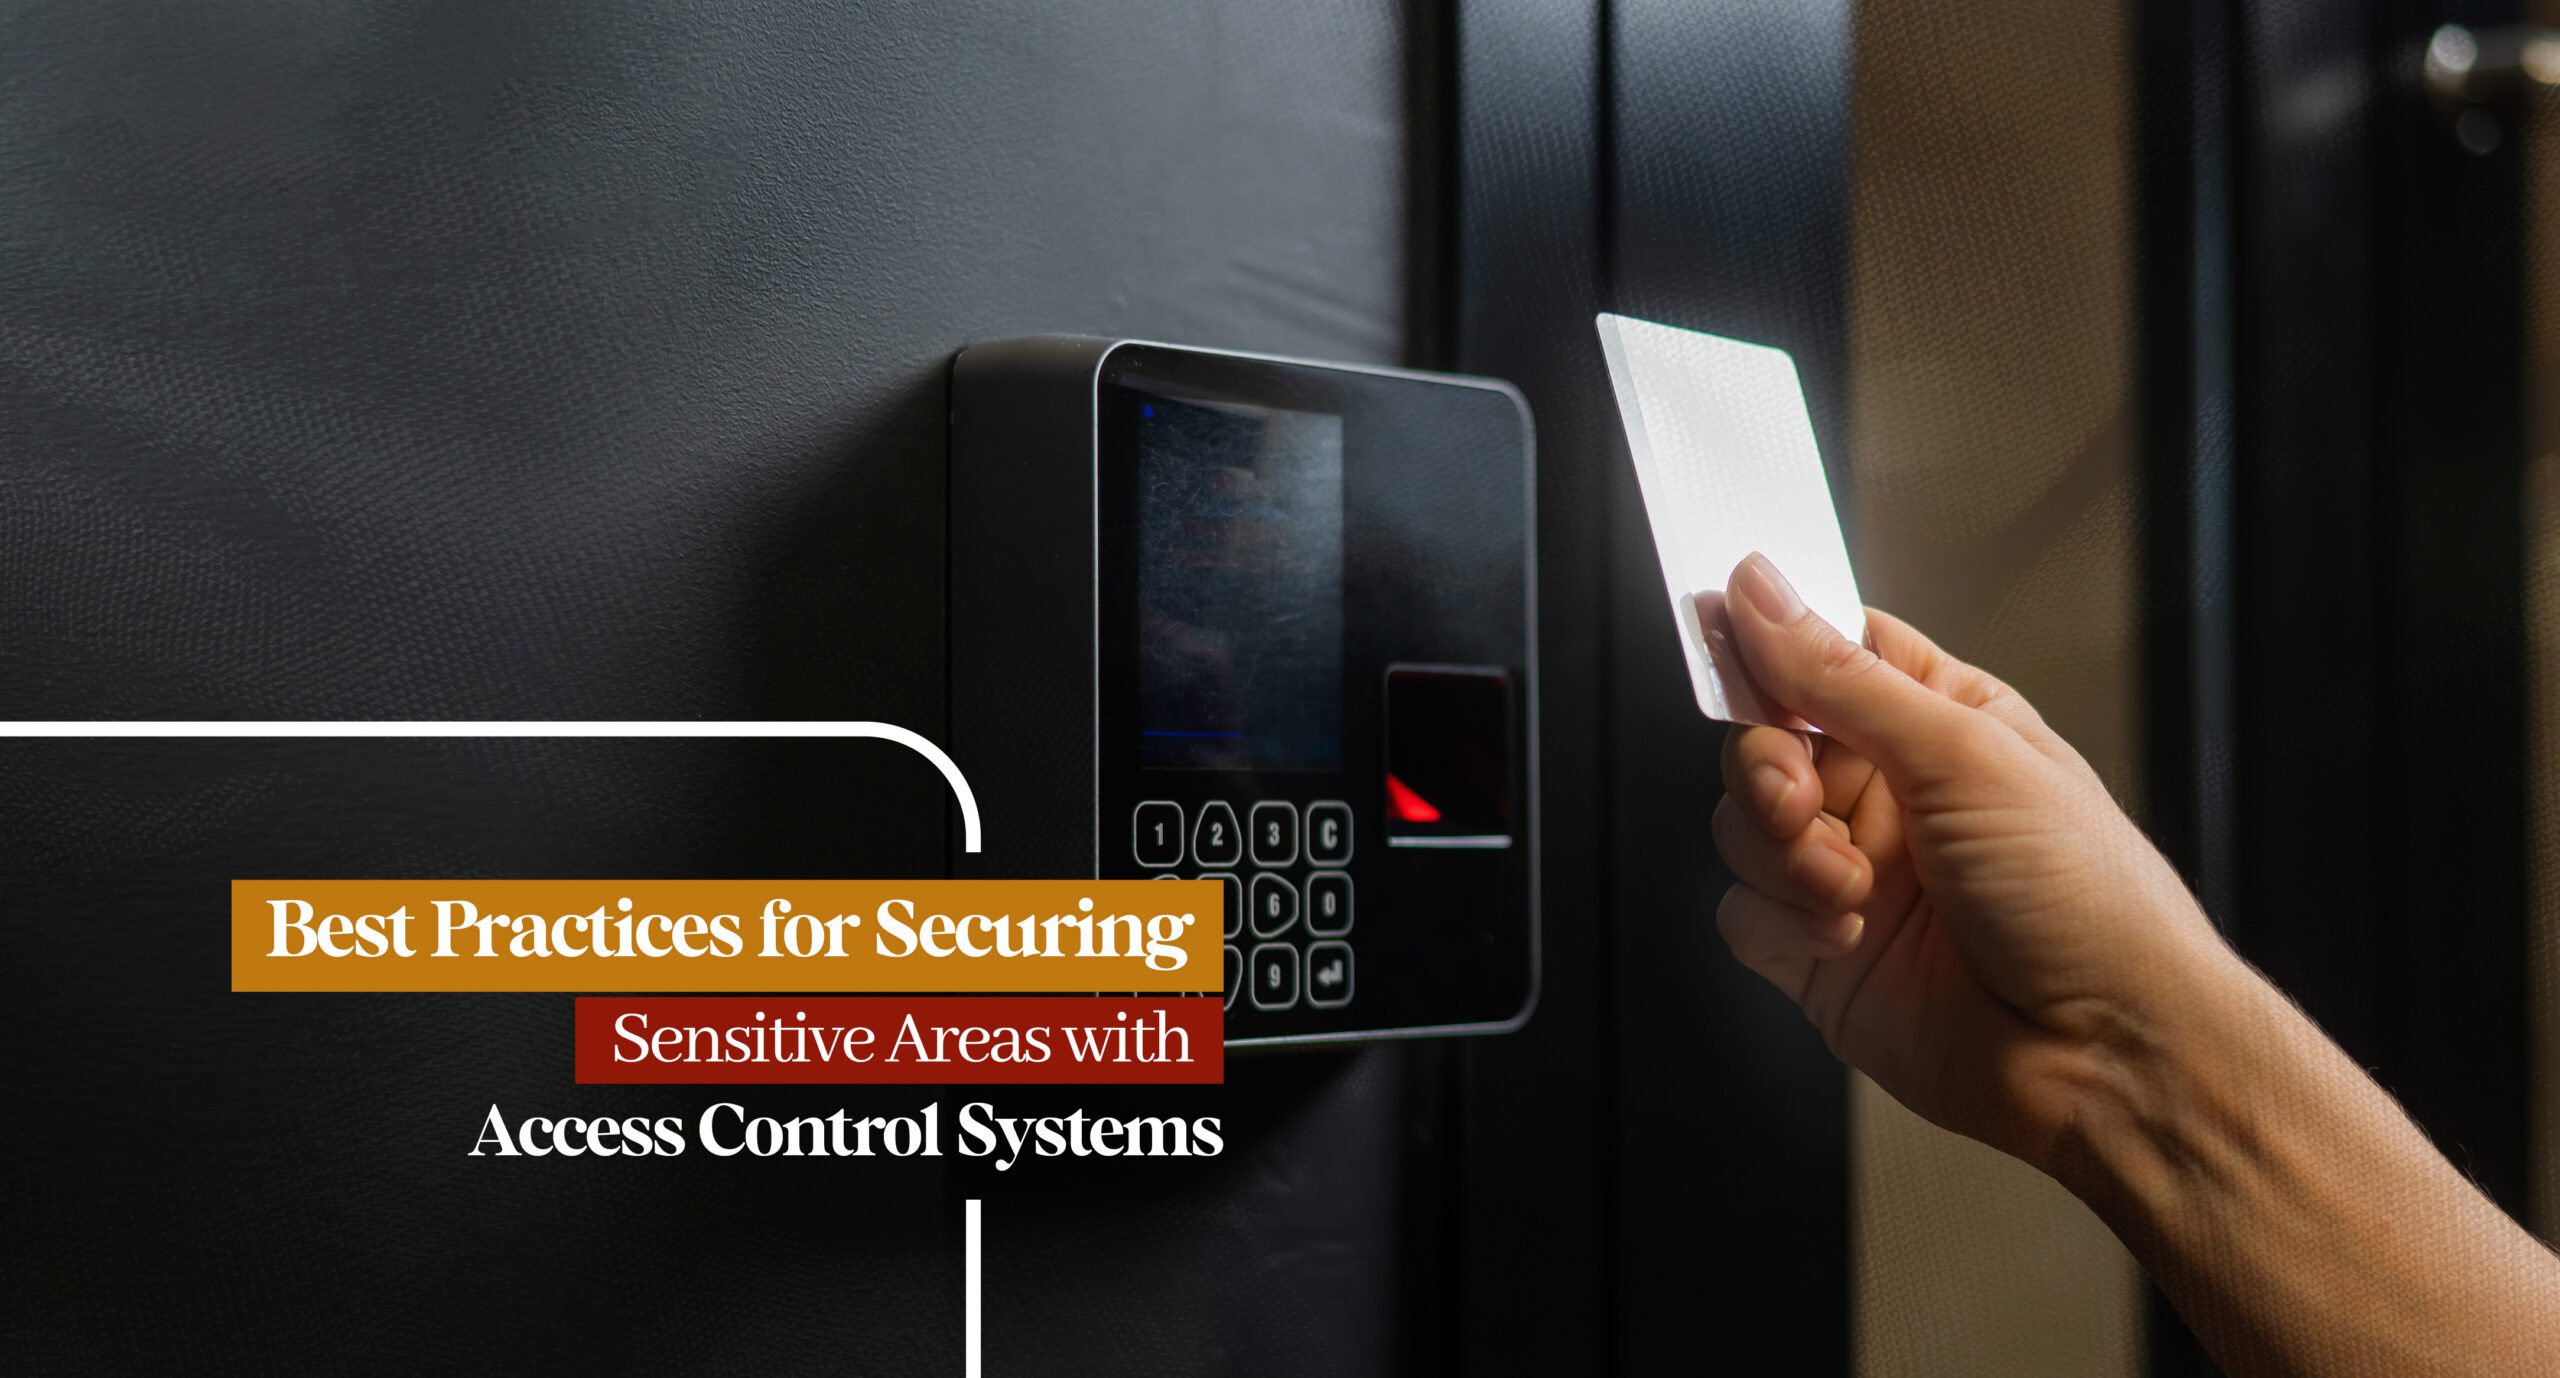 Featured image for “Best Practices for Securing Sensitive Areas with Access Control Systems”